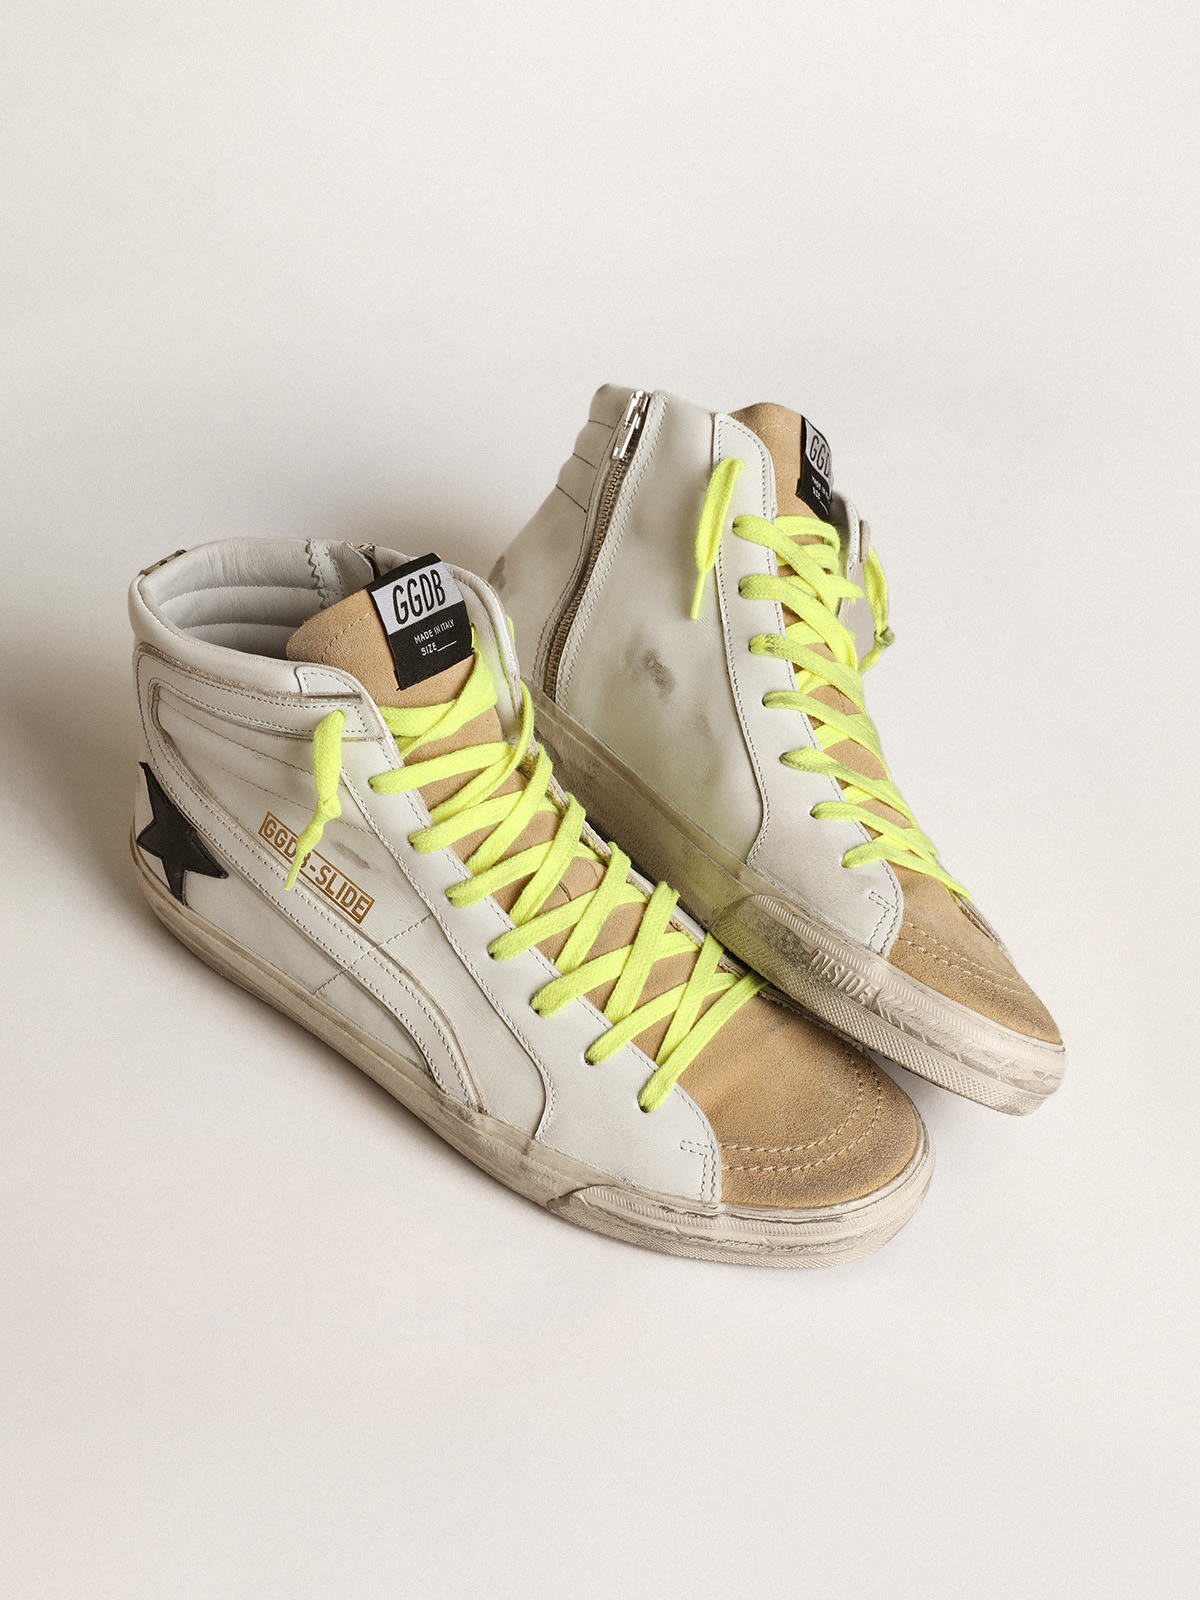 Golden Goose - Sneakers Slide in suede e pelle con listino camouflage in 